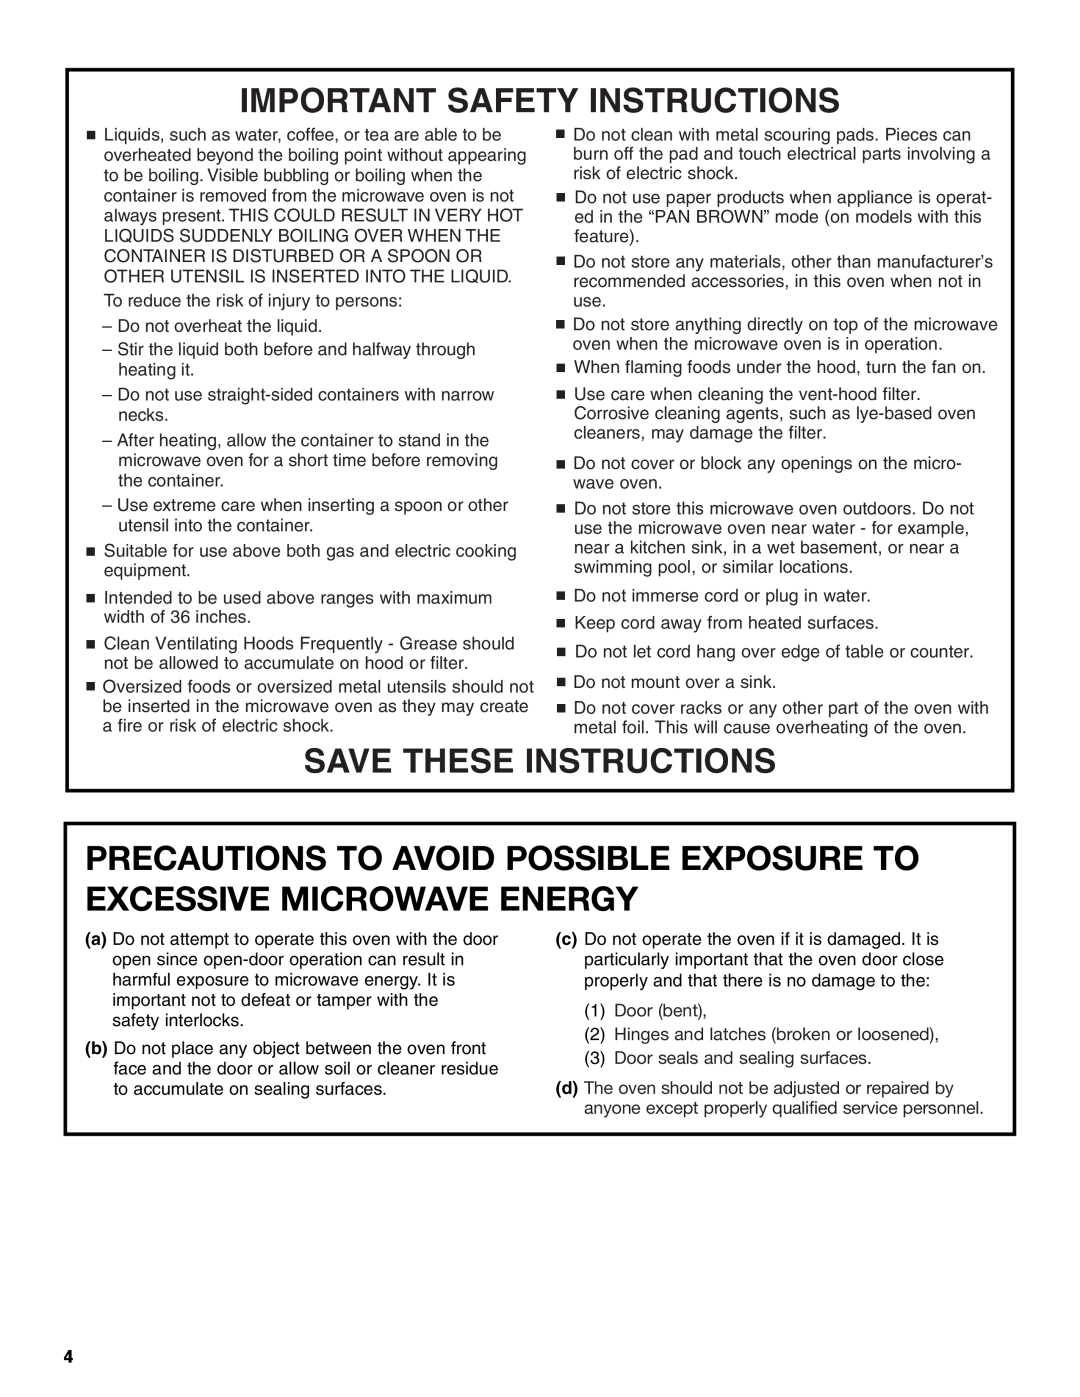 Whirlpool YMH1141XM Precautions To Avoid Possible Exposure To Excessive Microwave Energy, Door seals and sealing surfaces 